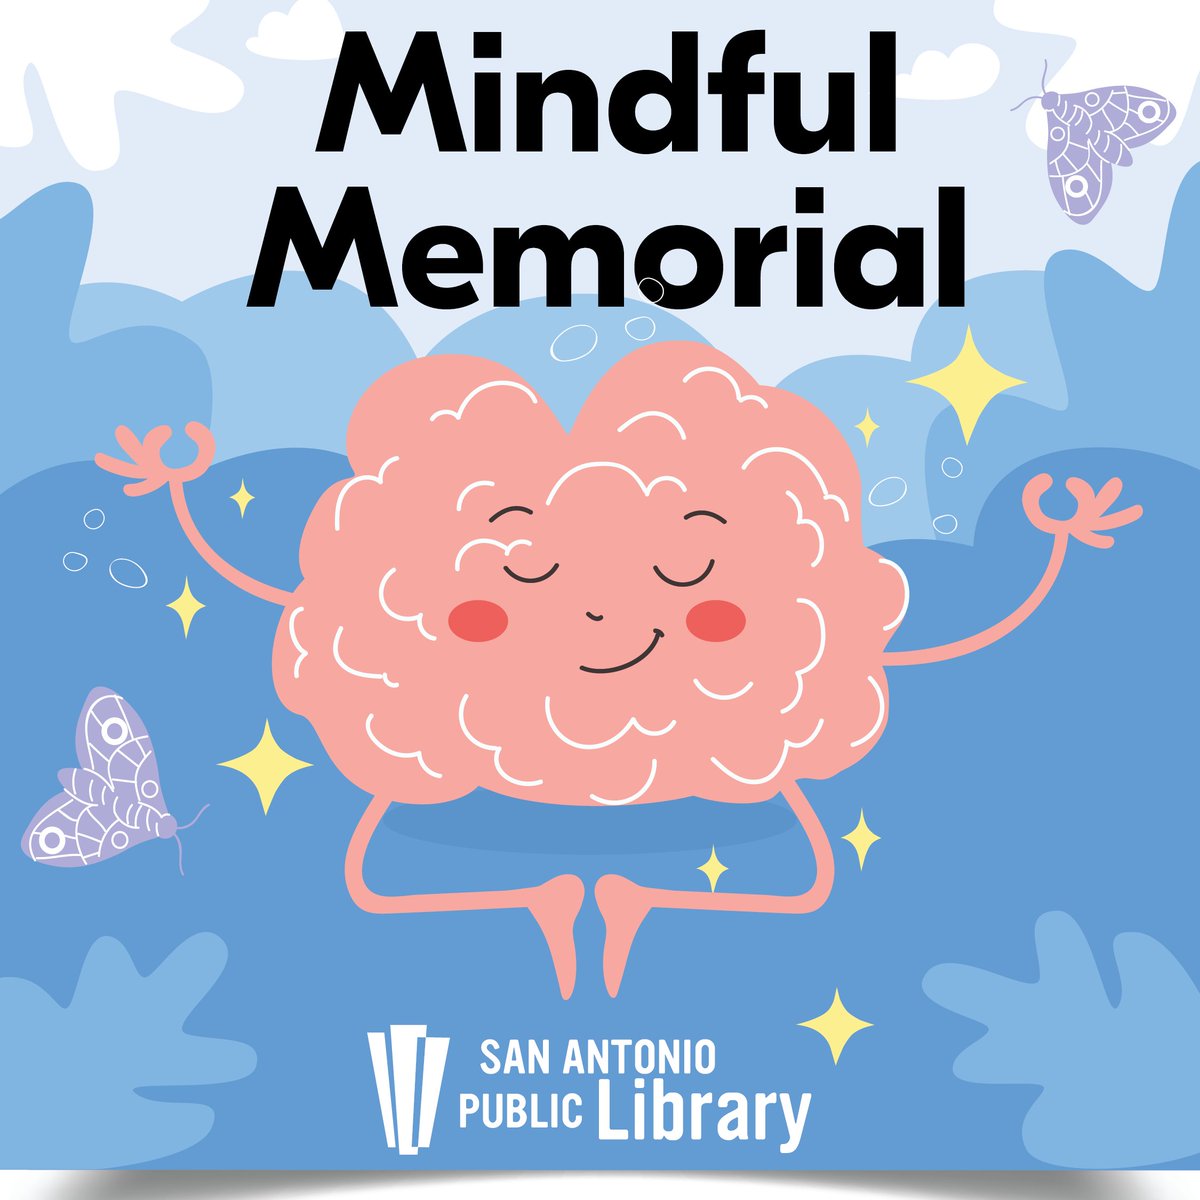 Did you know May is Mental Health Awareness Month? Join us on May 13 from 6-7 p.m. at Memorial Branch Library for Mindful Memorial -- a calming session of coloring, journaling, and soothing music. 🎨📔☮️🎵 Learn more: 🔗 mysapl.org/Events-News/Ev…